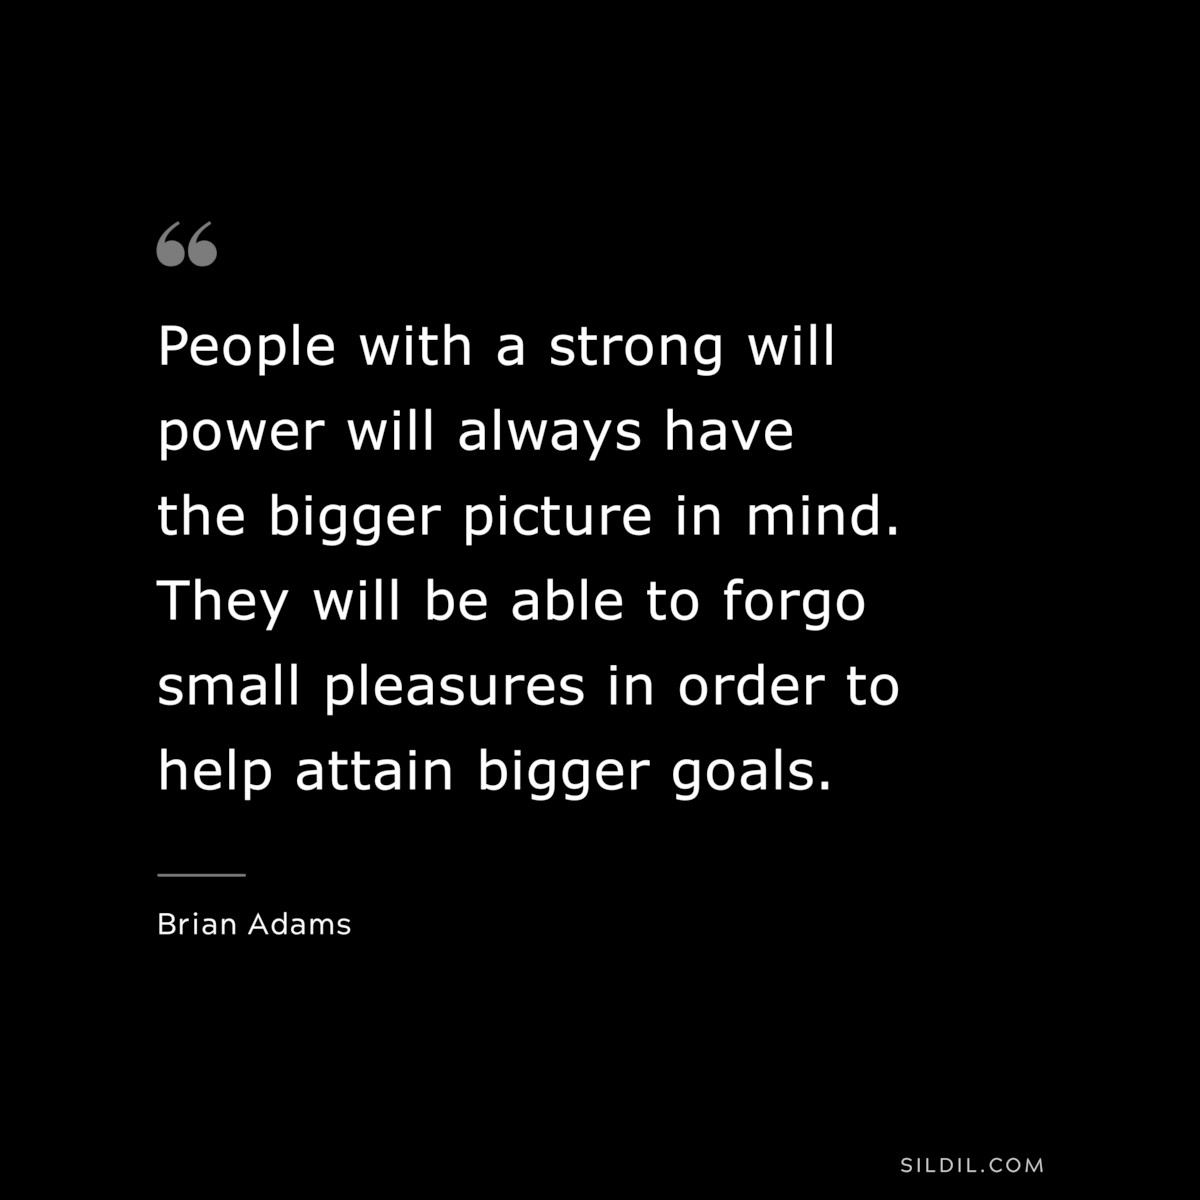 People with a strong will power will always have the bigger picture in mind. They will be able to forgo small pleasures in order to help attain bigger goals. ― Brian Adams